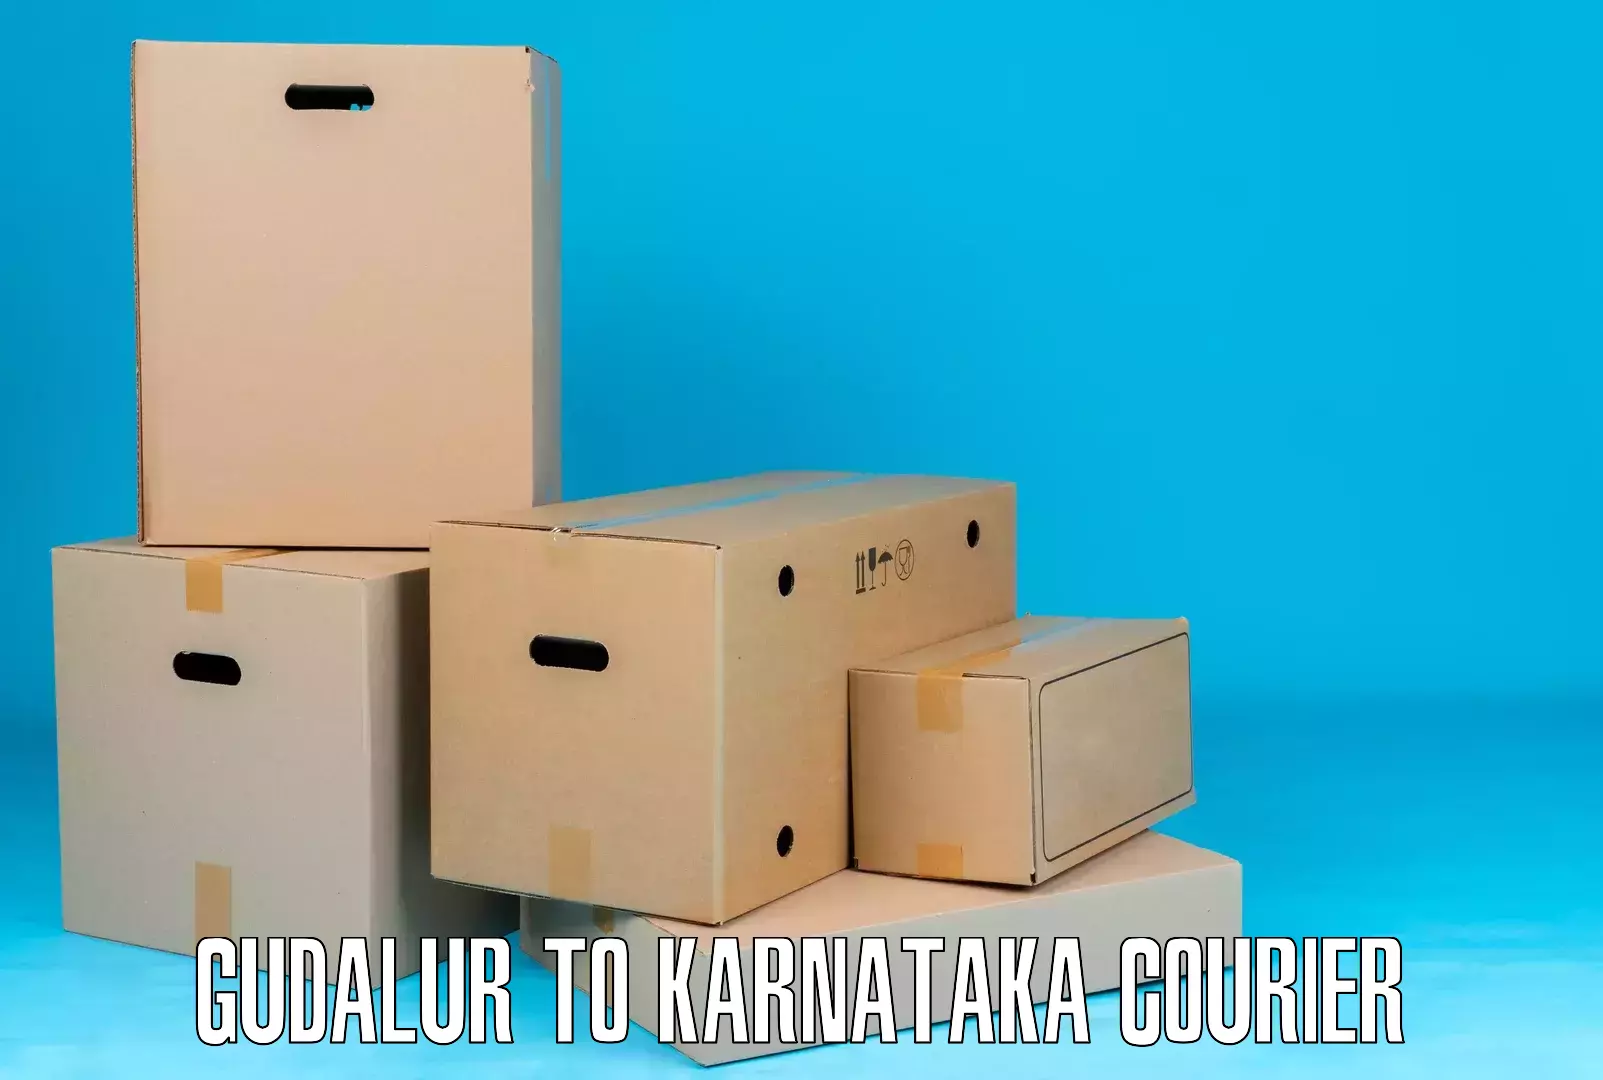 Modern courier technology Gudalur to Mangalore Port